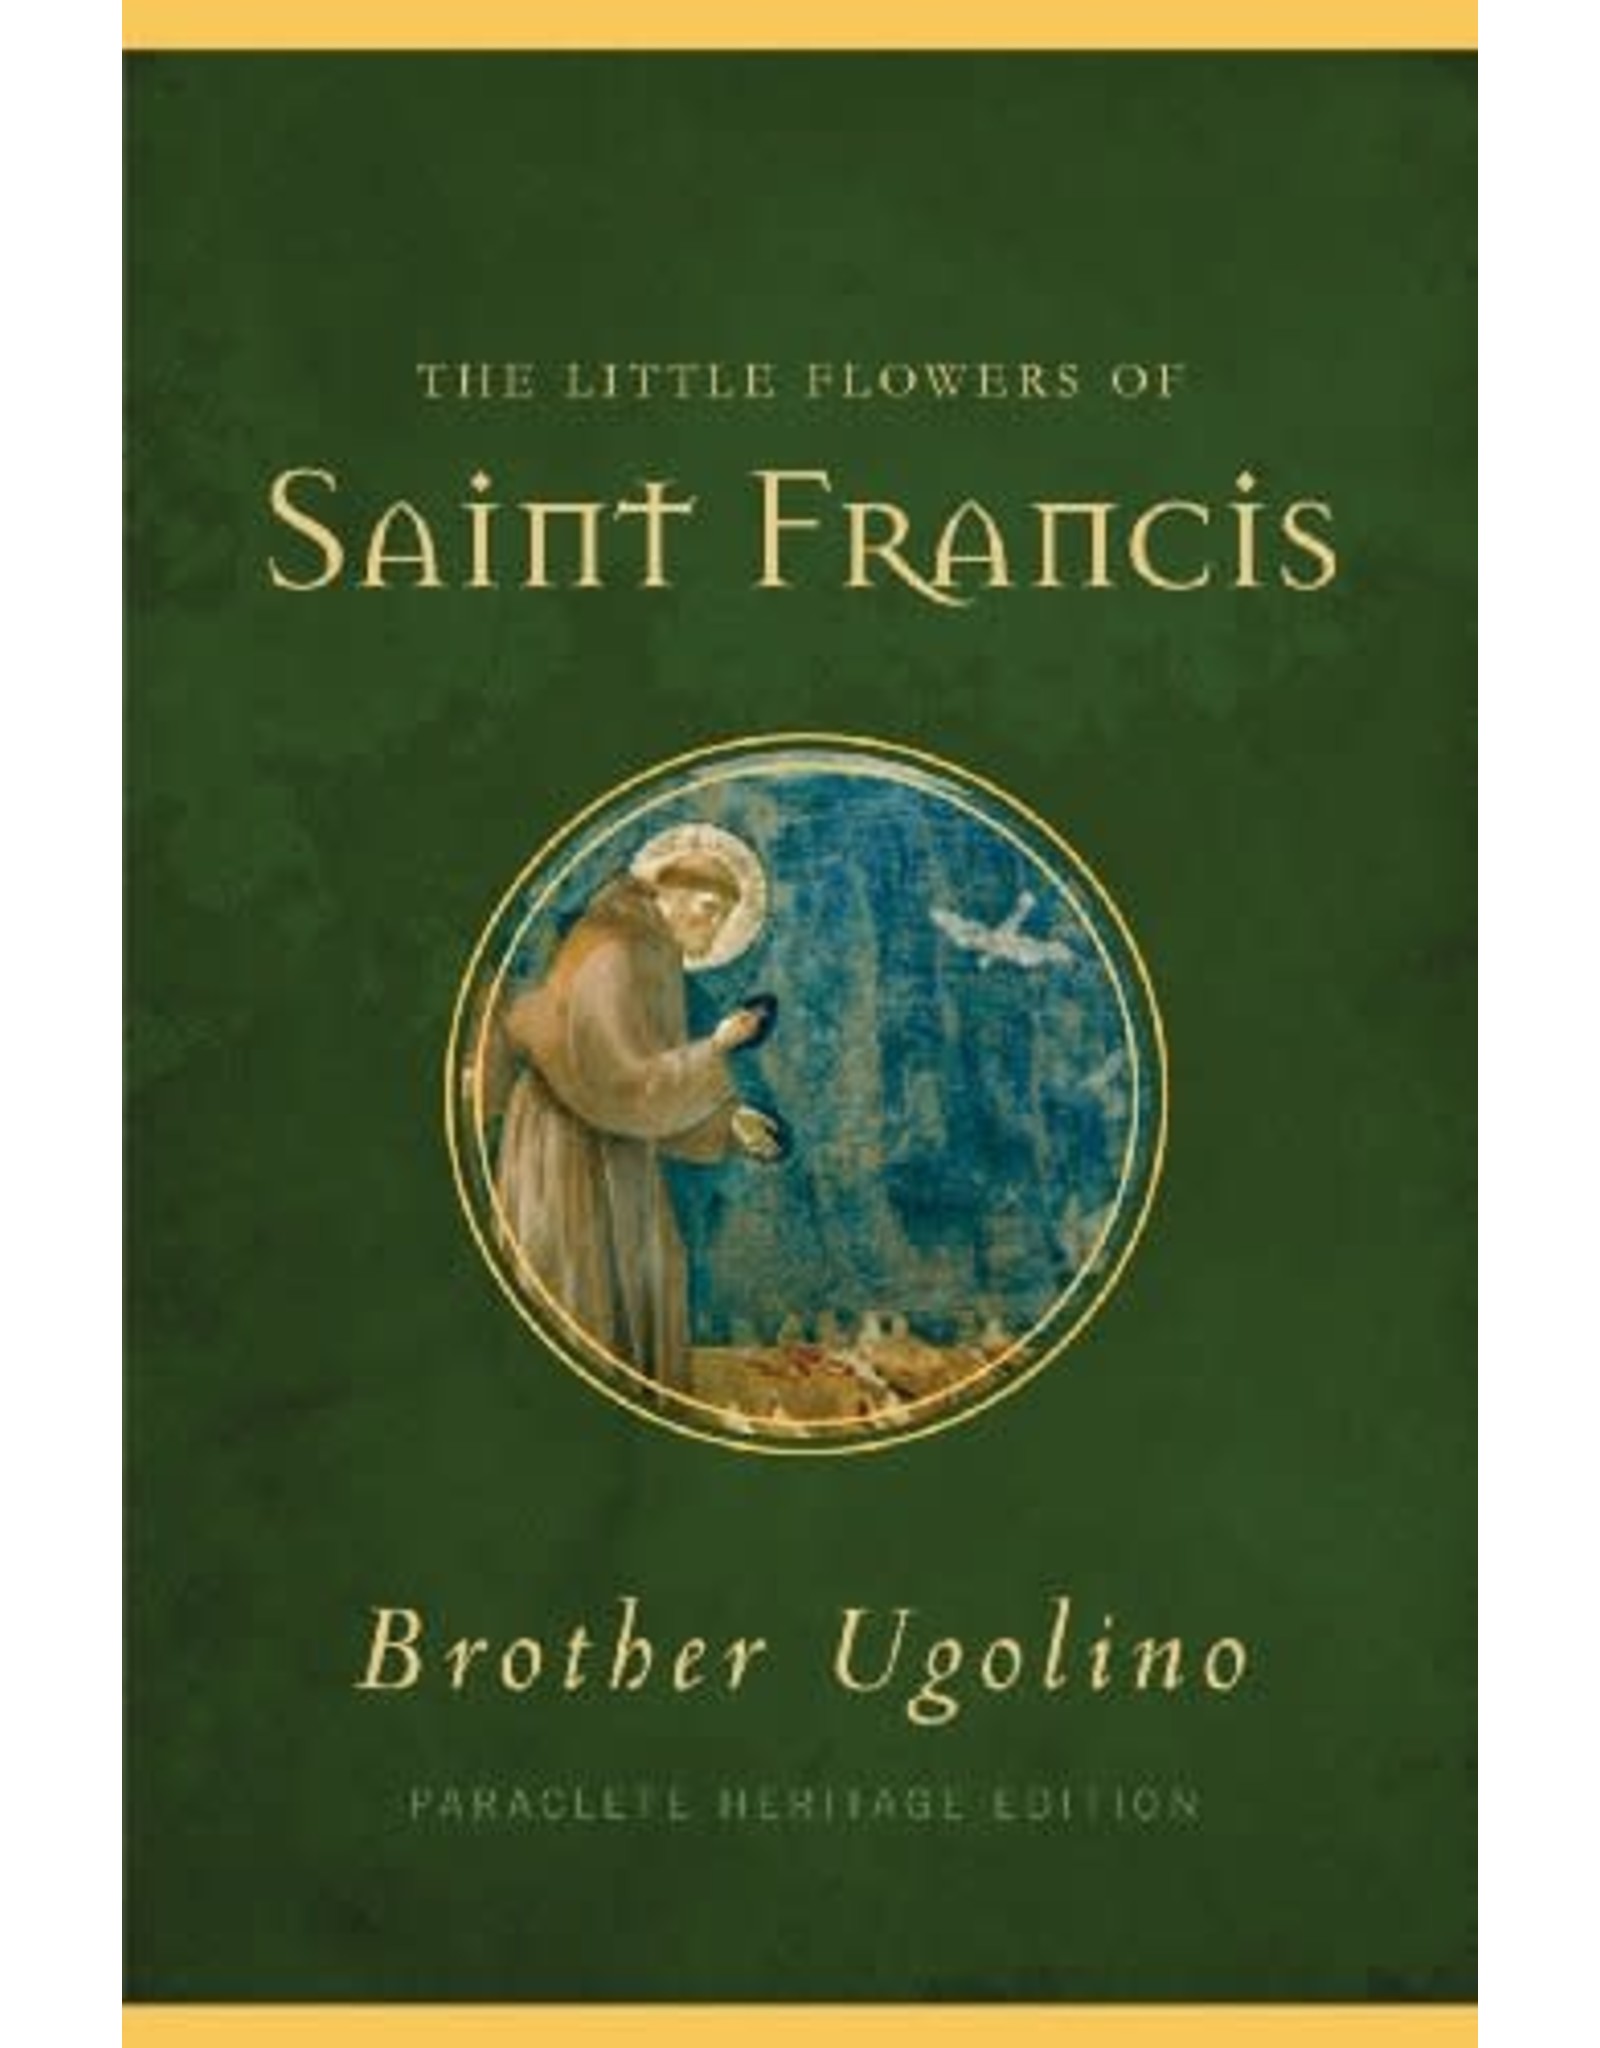 Paraclete Press The Little Flowers of Saint Francis by Brother Ugolino (Paraclete Heritage Edition, Hardcover)